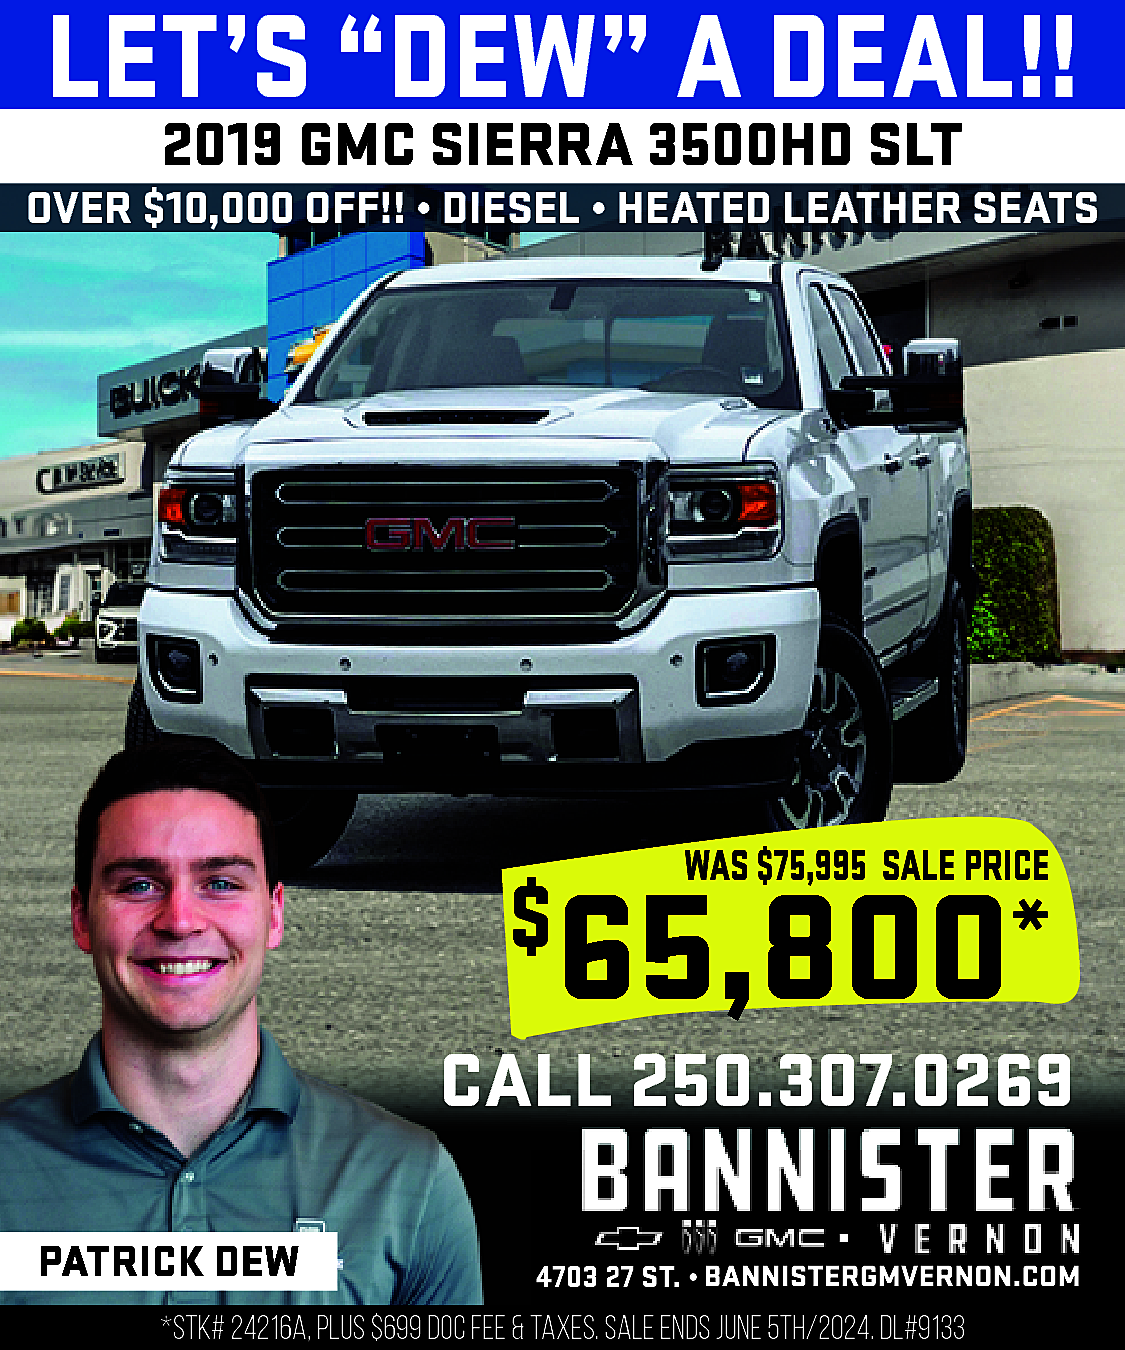 LET’S “DEW” A DEAL!! <br>2019  LET’S “DEW” A DEAL!!  2019 GMC SIERRA 3500HD SLT    OVER $10,000 OFF!! • DIESEL • HEATED LEATHER SEATS    WAS $75,995 SALE PRICE    65,800*    $    CALL 250.307.0269  PATRICK DEW    4703 27 ST. • https://www.bannistergmvernon.com/    *STK# 24216A, PLUS $699 DOC FEE & TAXES. SALE ENDS JUNE 5TH/2024. DL#9133    